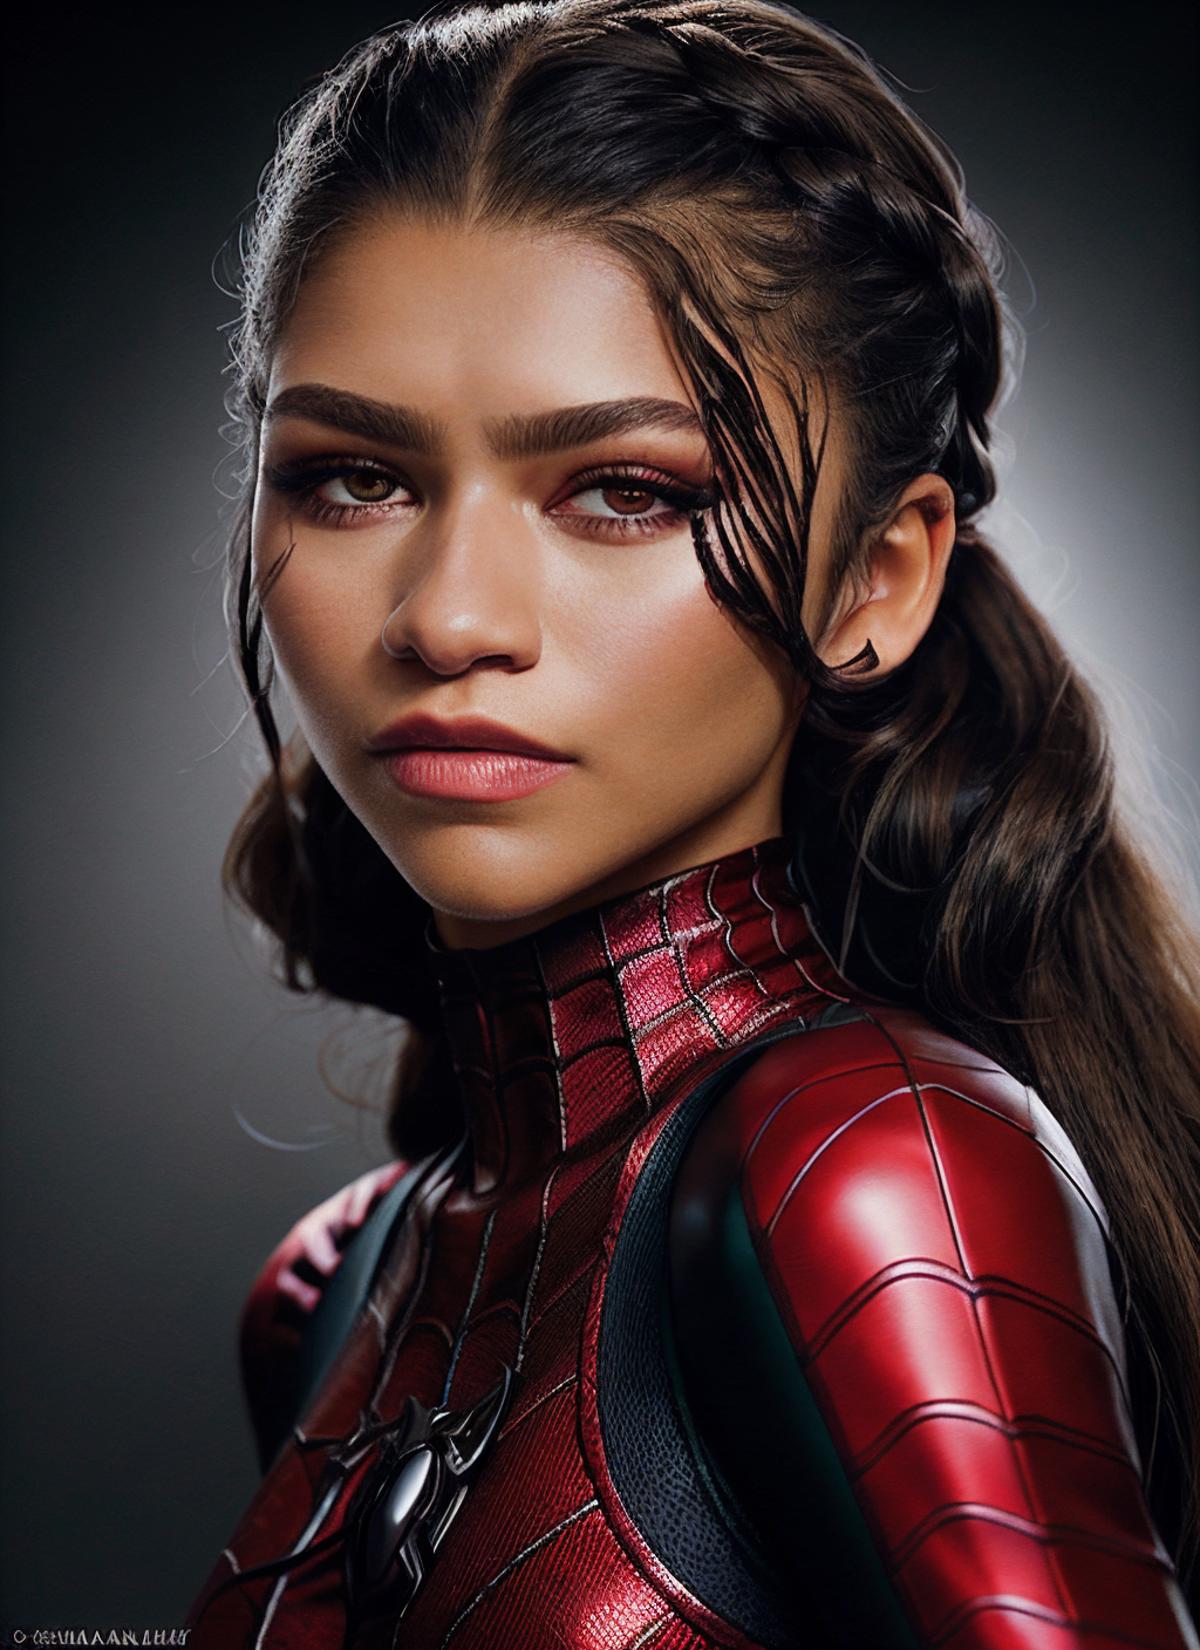 Zendaya (from Spiderman and Dune movies) image by astragartist